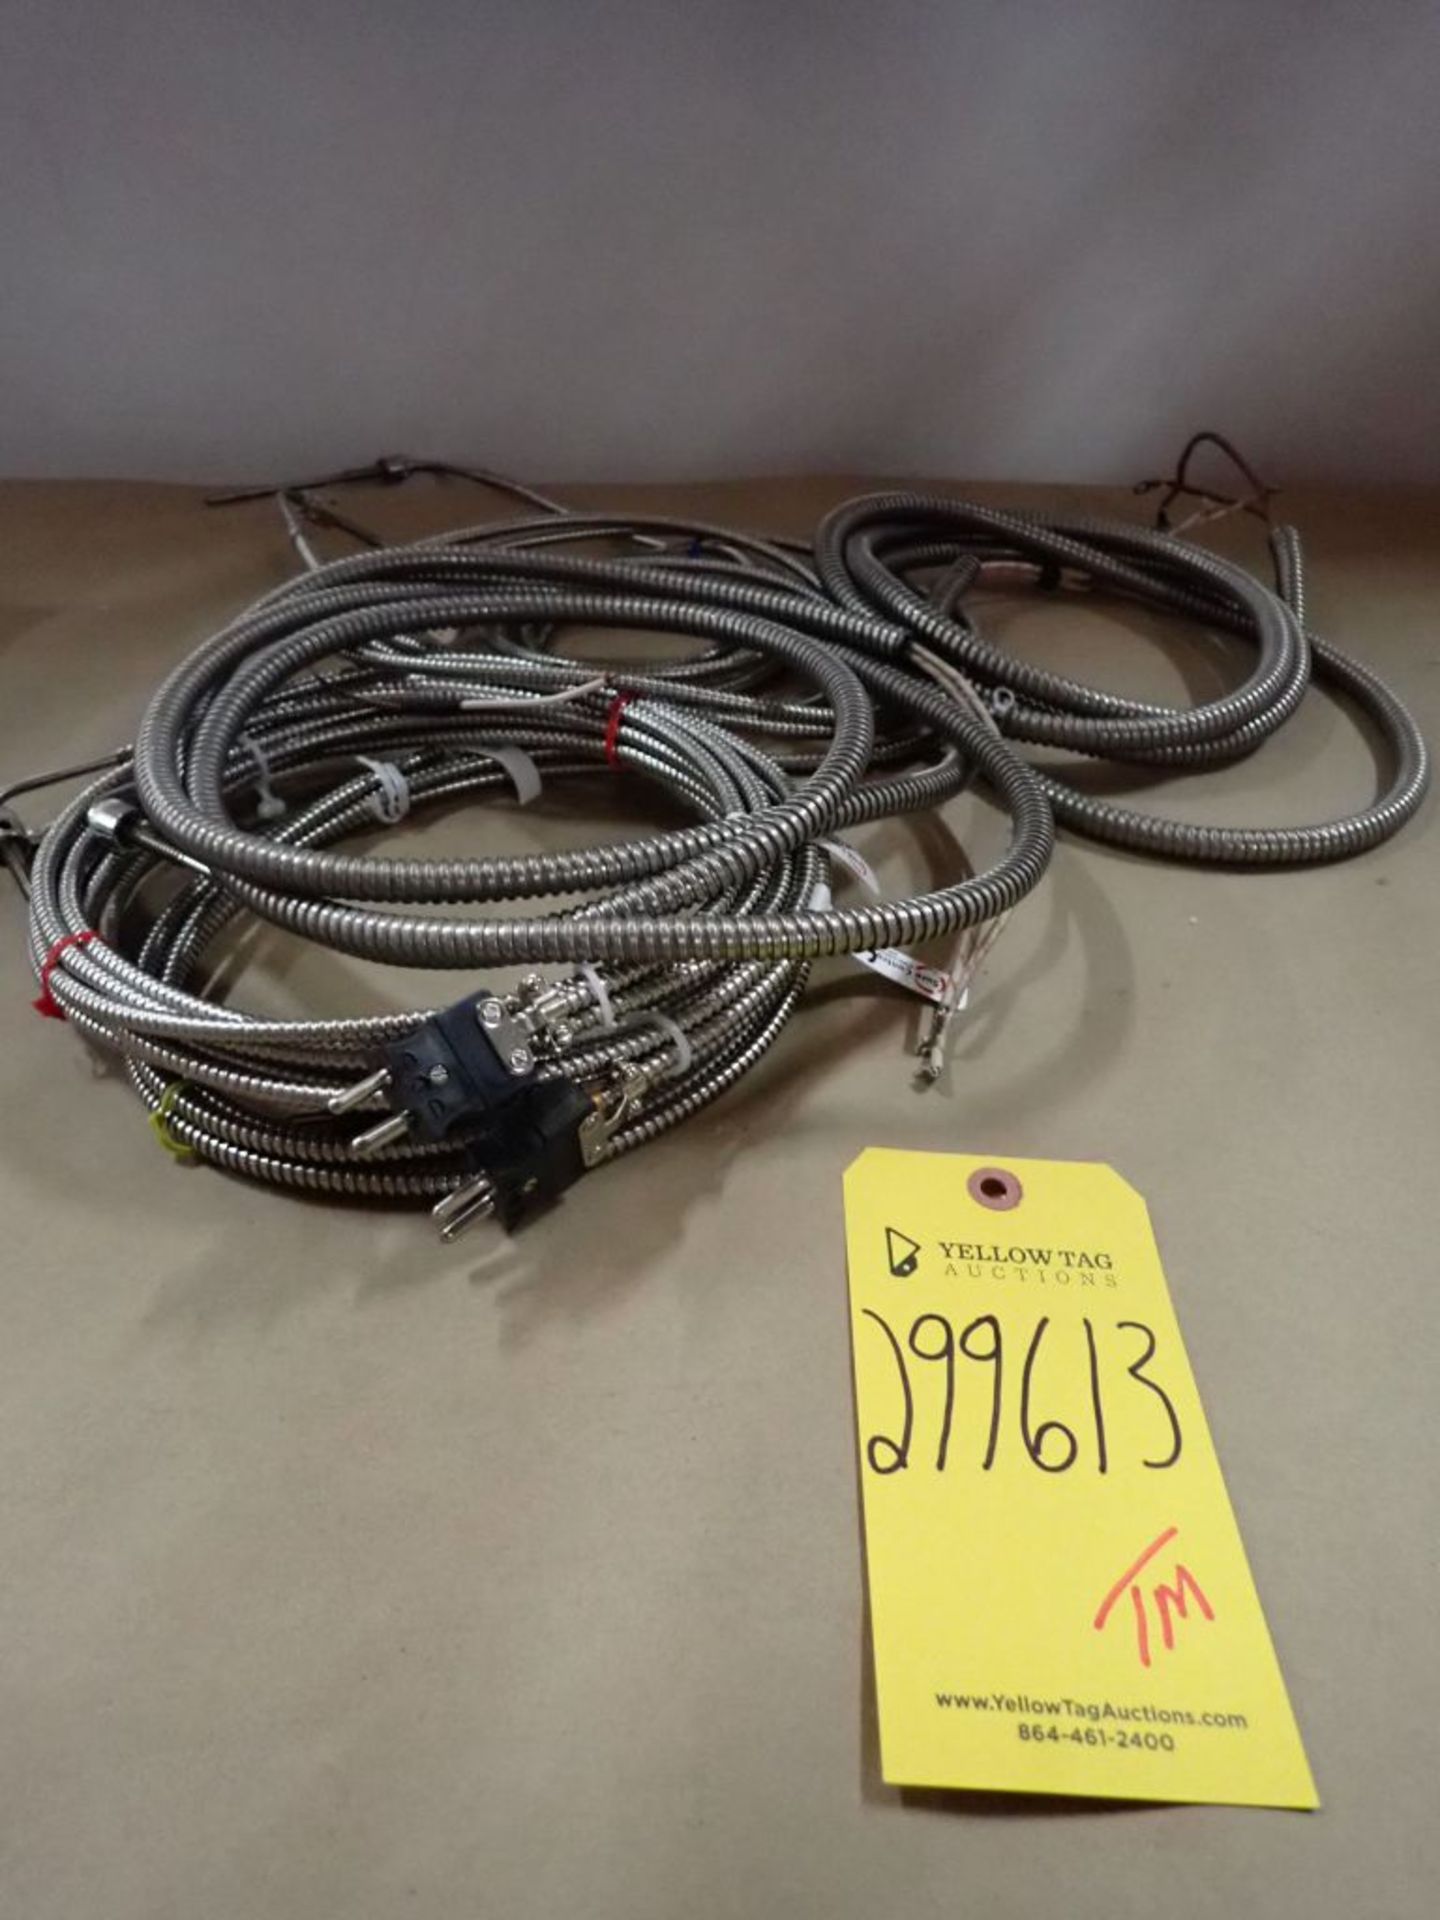 Lot of (7) Sure Controls Inc. Theromocouple Cable with Connectors